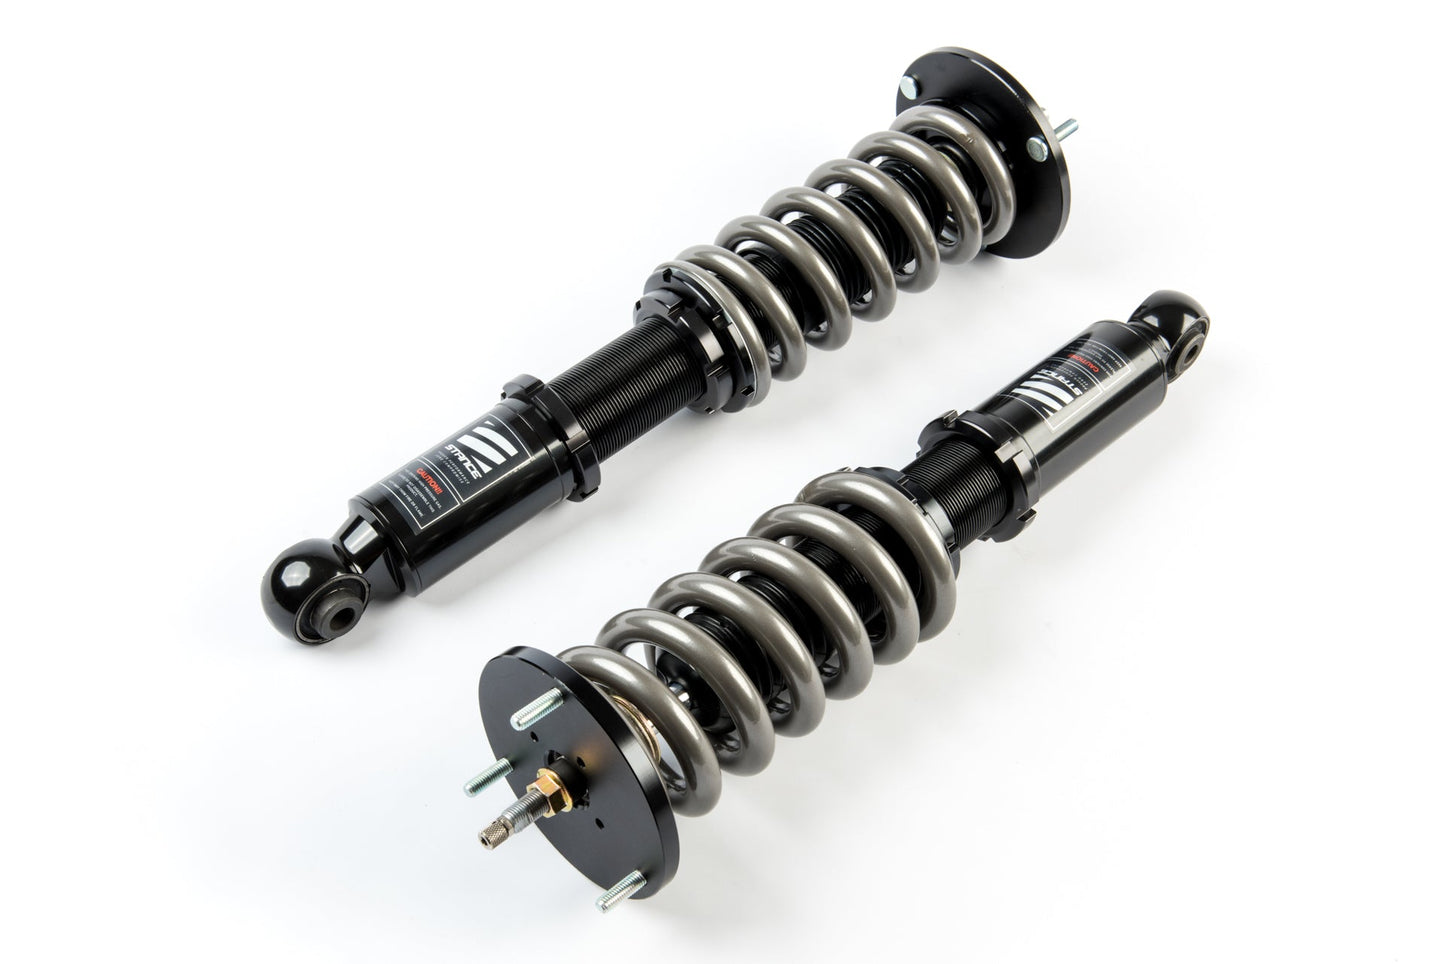 Stance Suspension - XR1 Coilovers for 92-01 Toyota Mark II/Chaser JZX90/JZX100 (ST-JZX90-XR1)